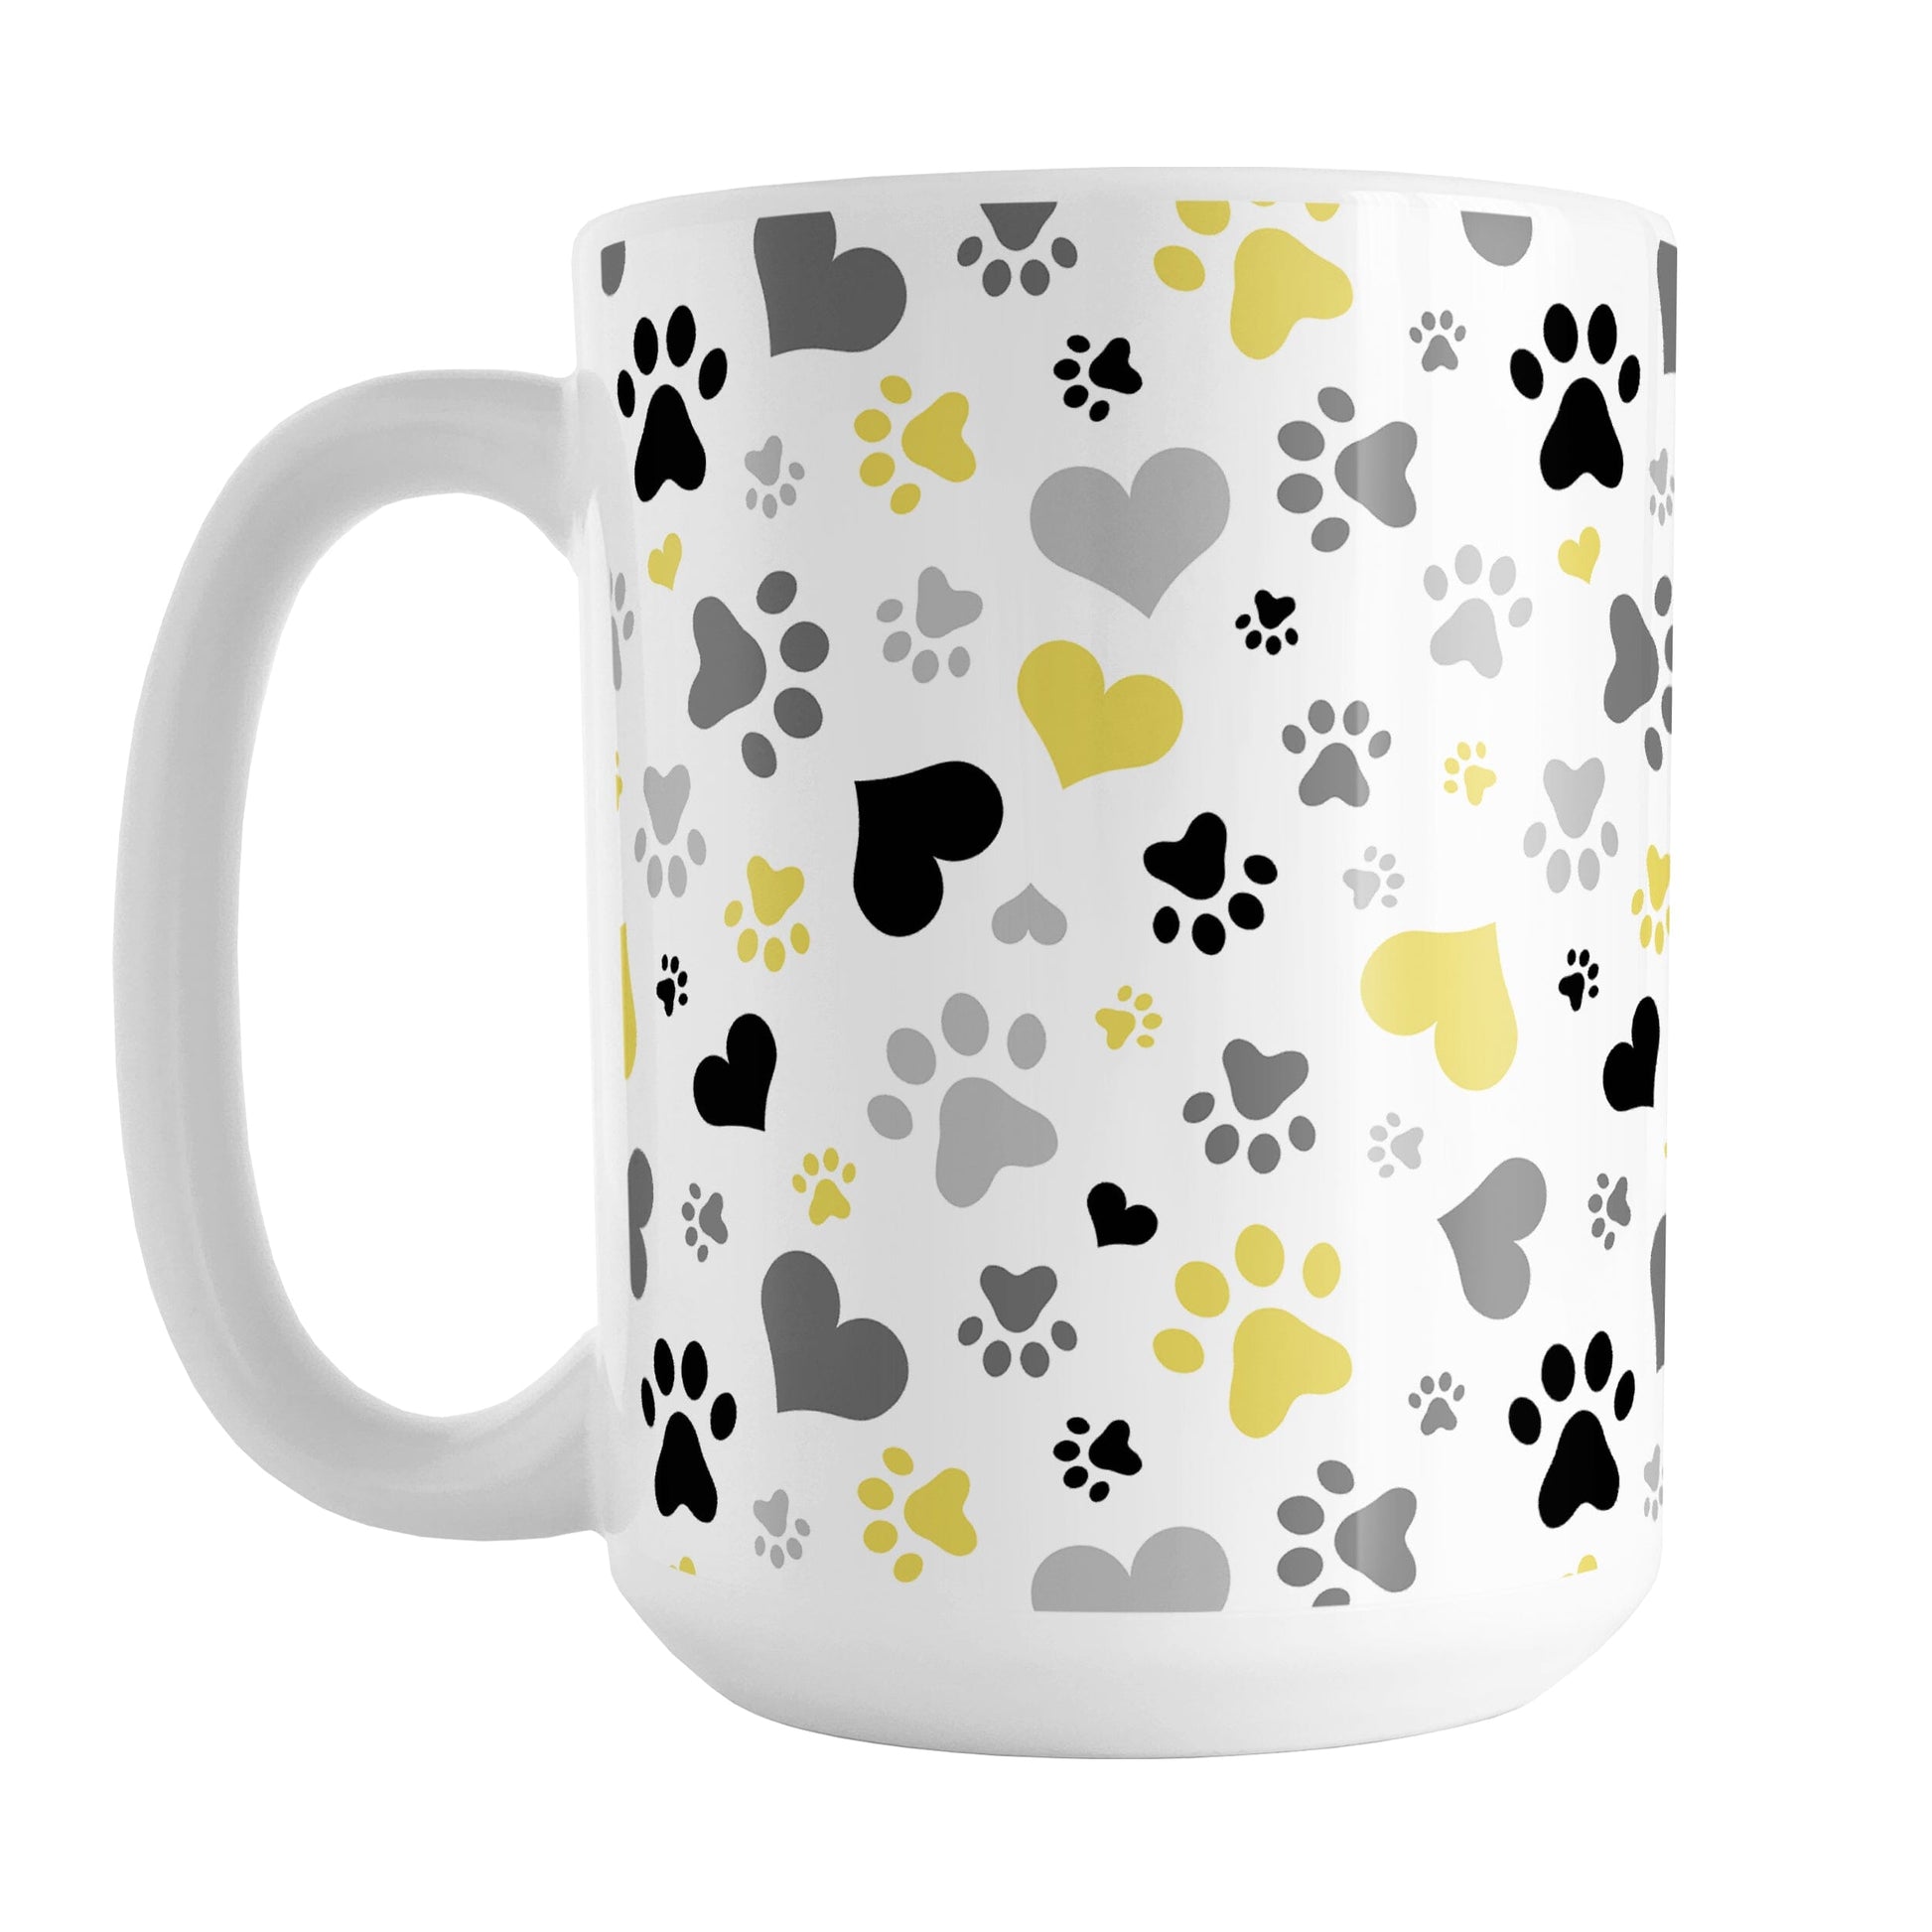 Black and Yellow Hearts and Paw Prints Mug (15oz) at Amy's Coffee Mugs. A ceramic coffee mug designed with a pattern of hearts and paw prints in red and different shades of black and gray that wraps around the mug to the handle. This mug is perfect for people love dogs and cute paw print designs.